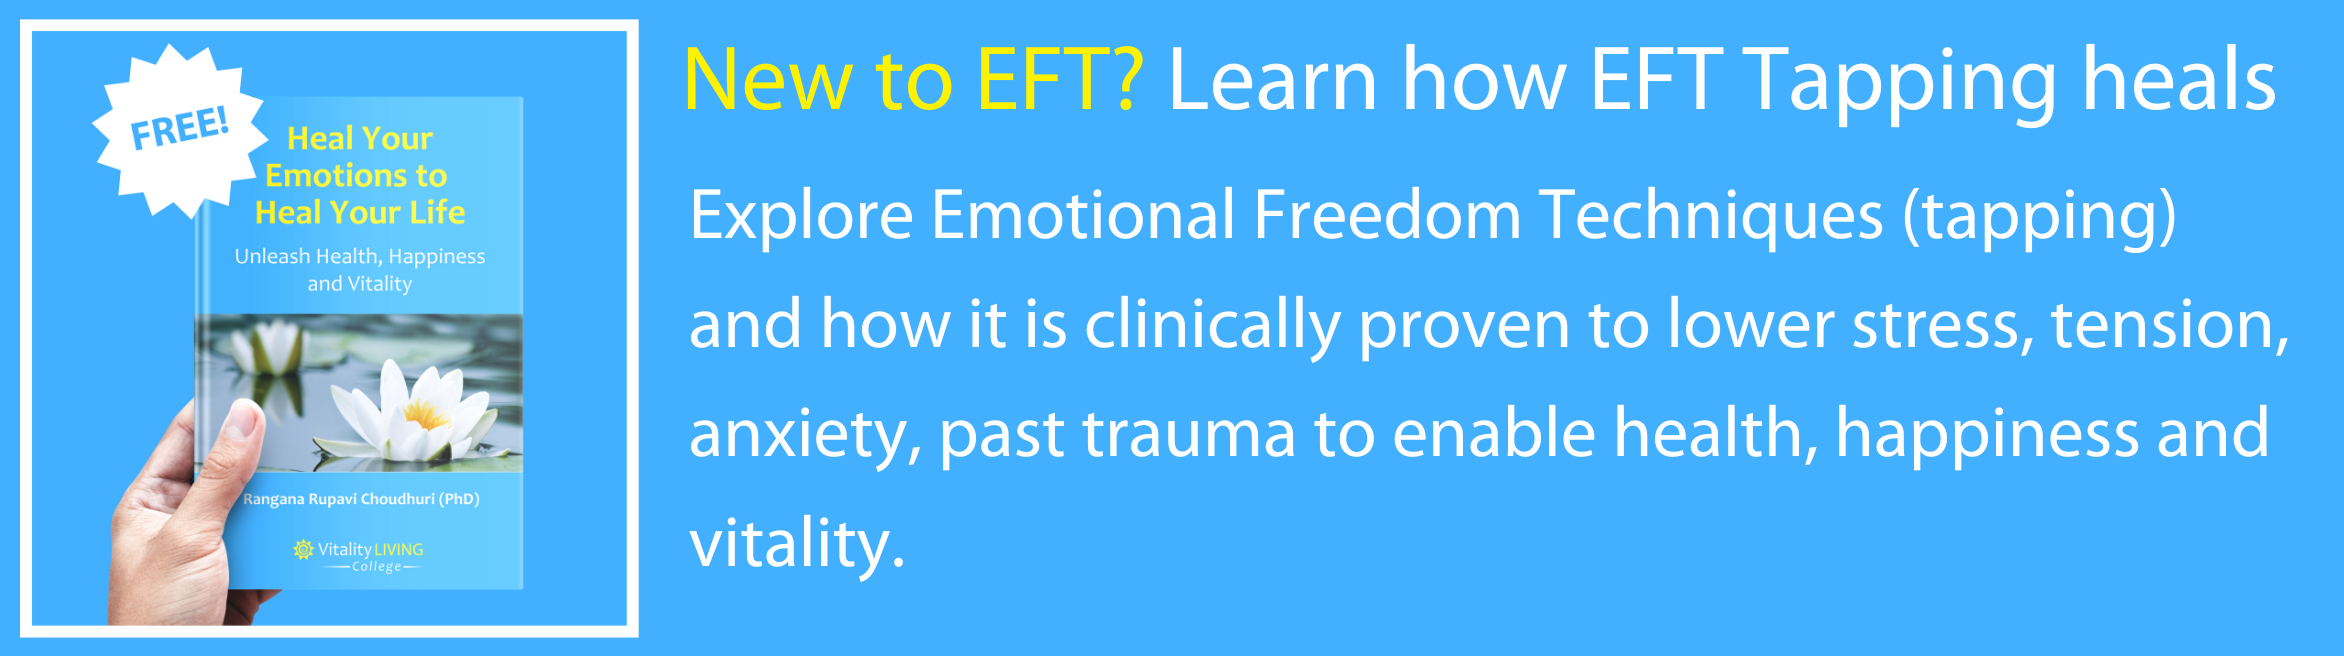 Treat ptsd and traumatic stress with EFT Tapping